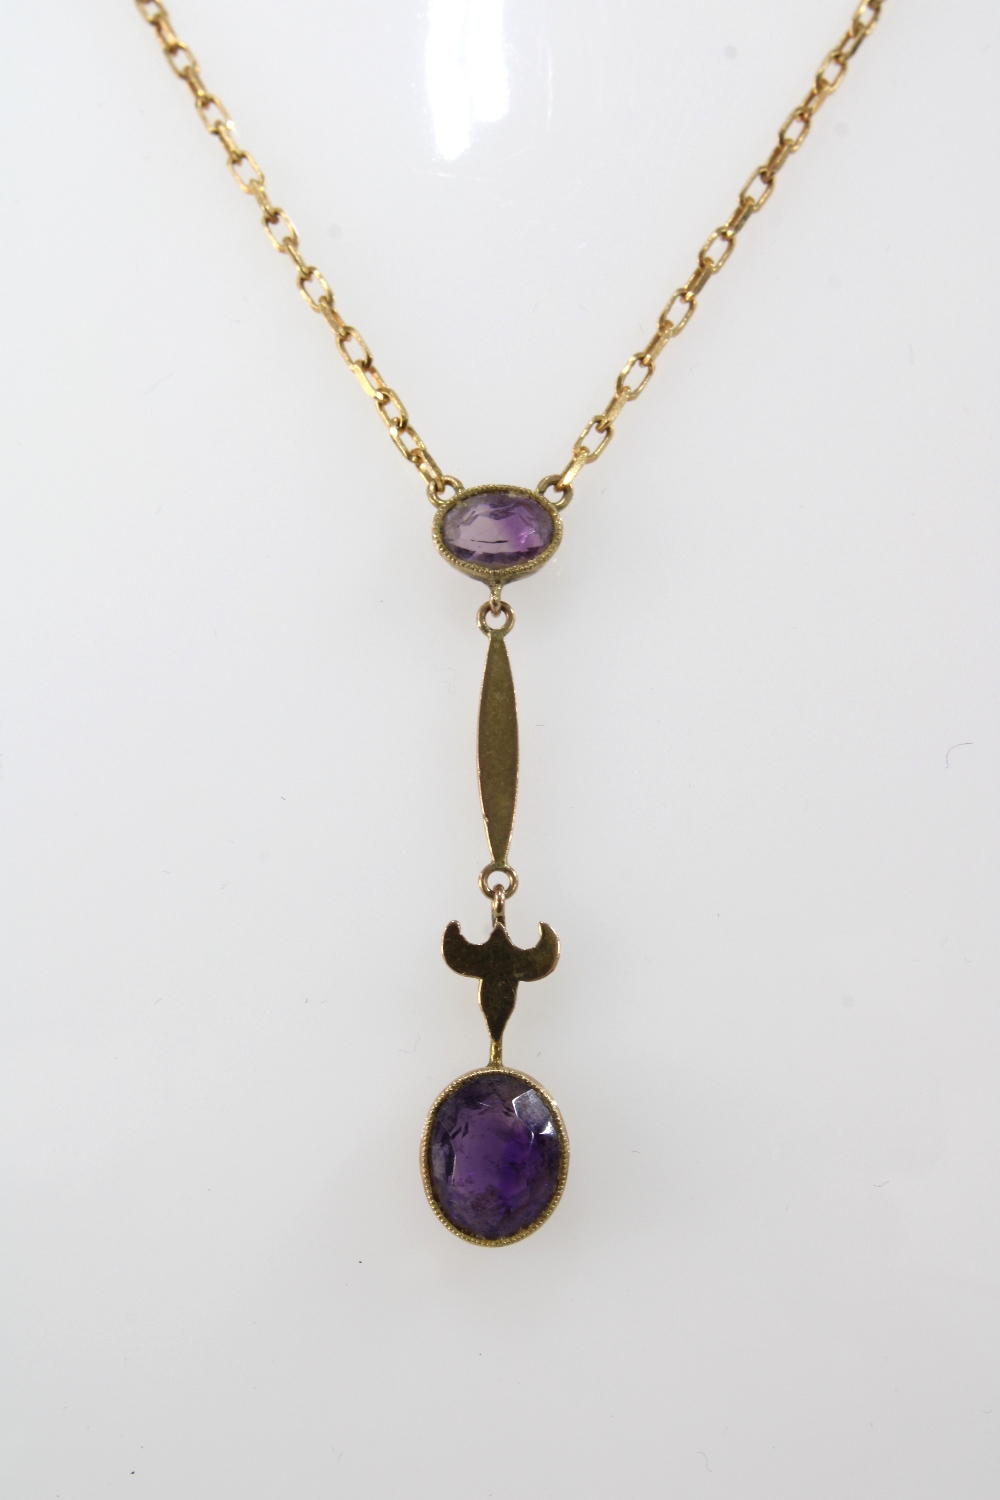 9ct gold and amethyst pendant necklace, stamped 9ct - Image 2 of 3